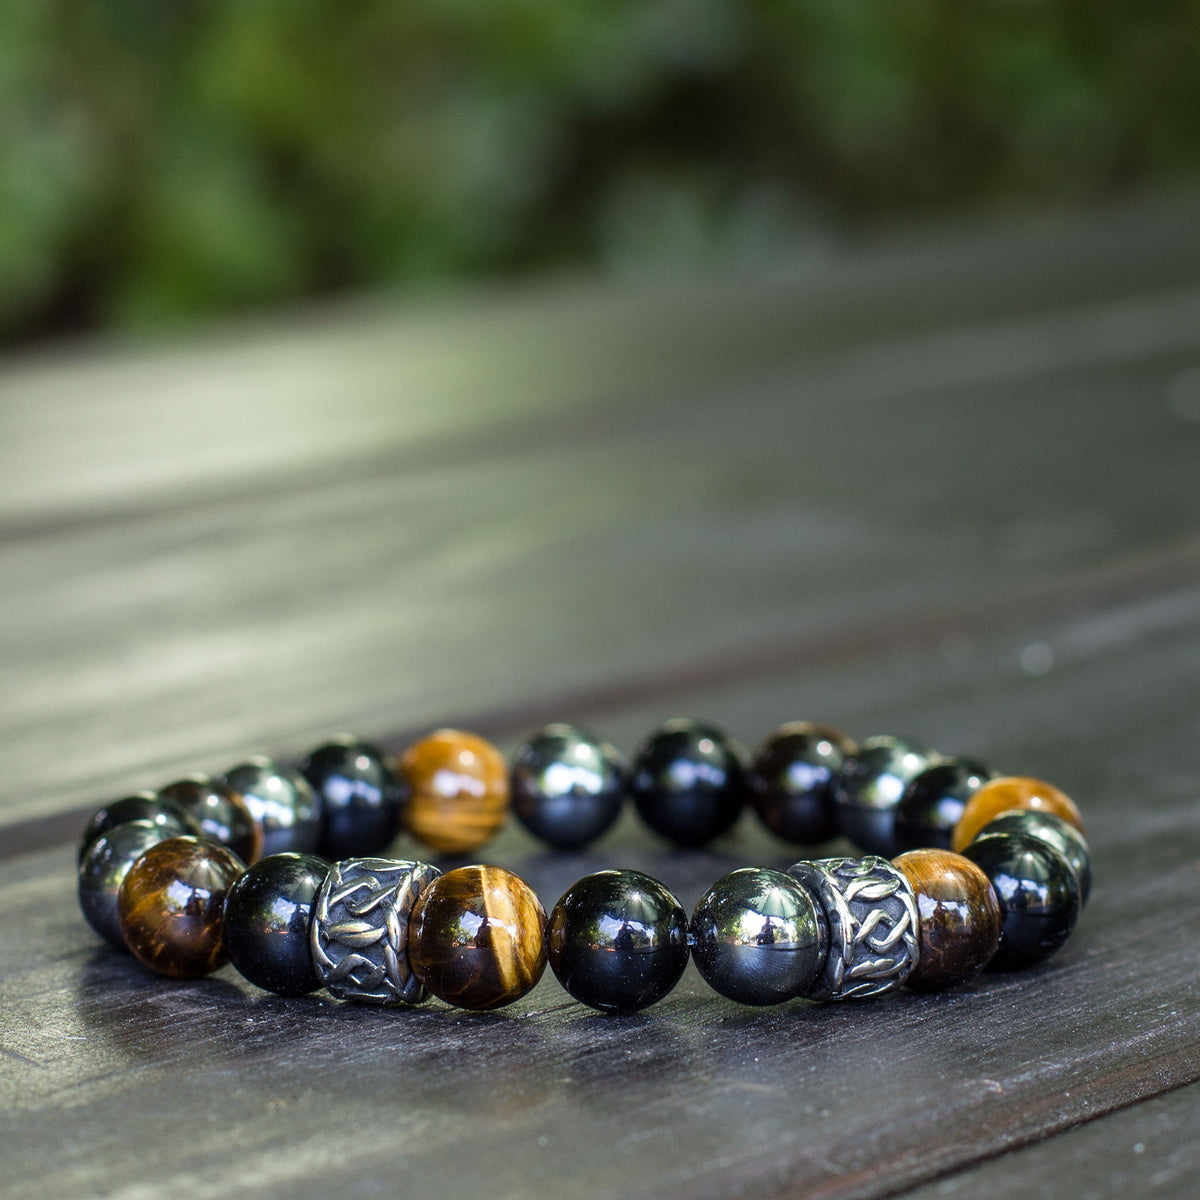 The Triple Protection bracelet 10mm - 3 of the most powerful crystals combined to create perfection. The Triple Protection Bracelet is one of our most sought after bracelets, boasting some of the most incredible gems around. Tiger’s eye, black Obsidian and Hematite is the powerhouse of beads when combined into one.